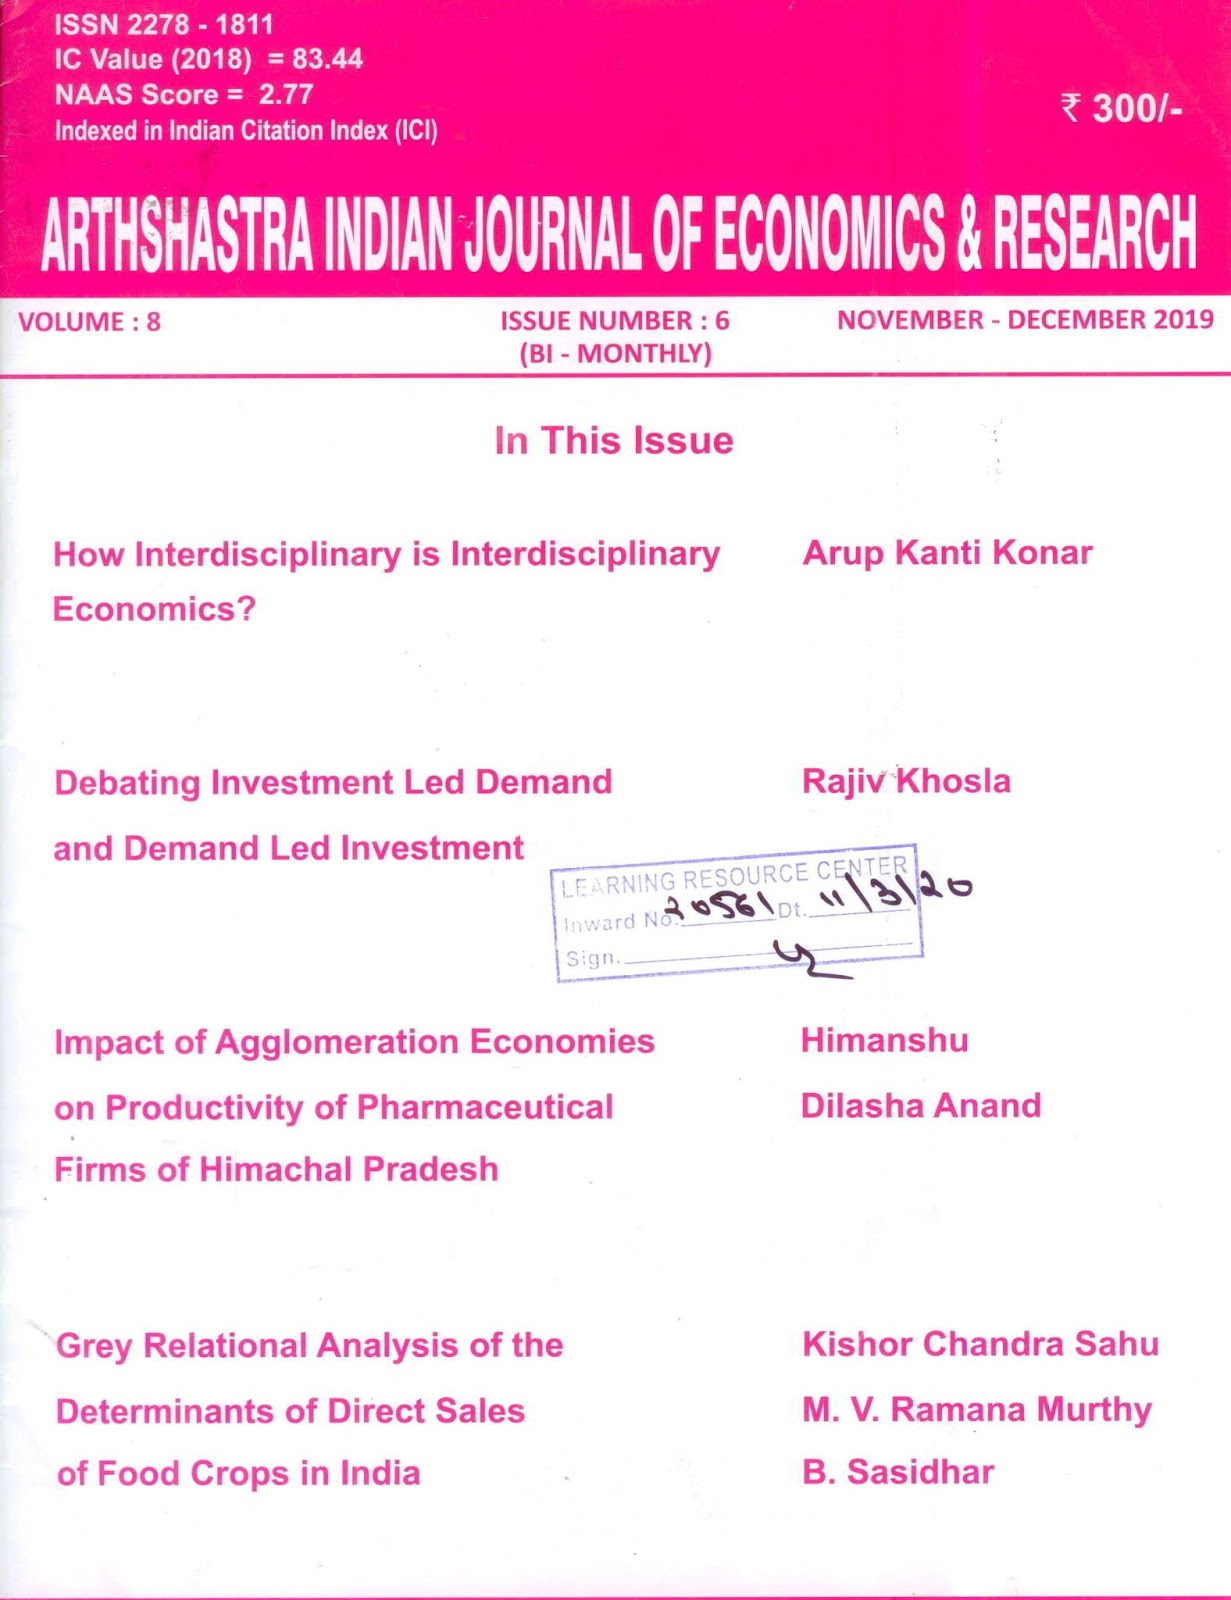 http://indianjournalofeconomicsandresearch.com/index.php/aijer/issue/view/8783